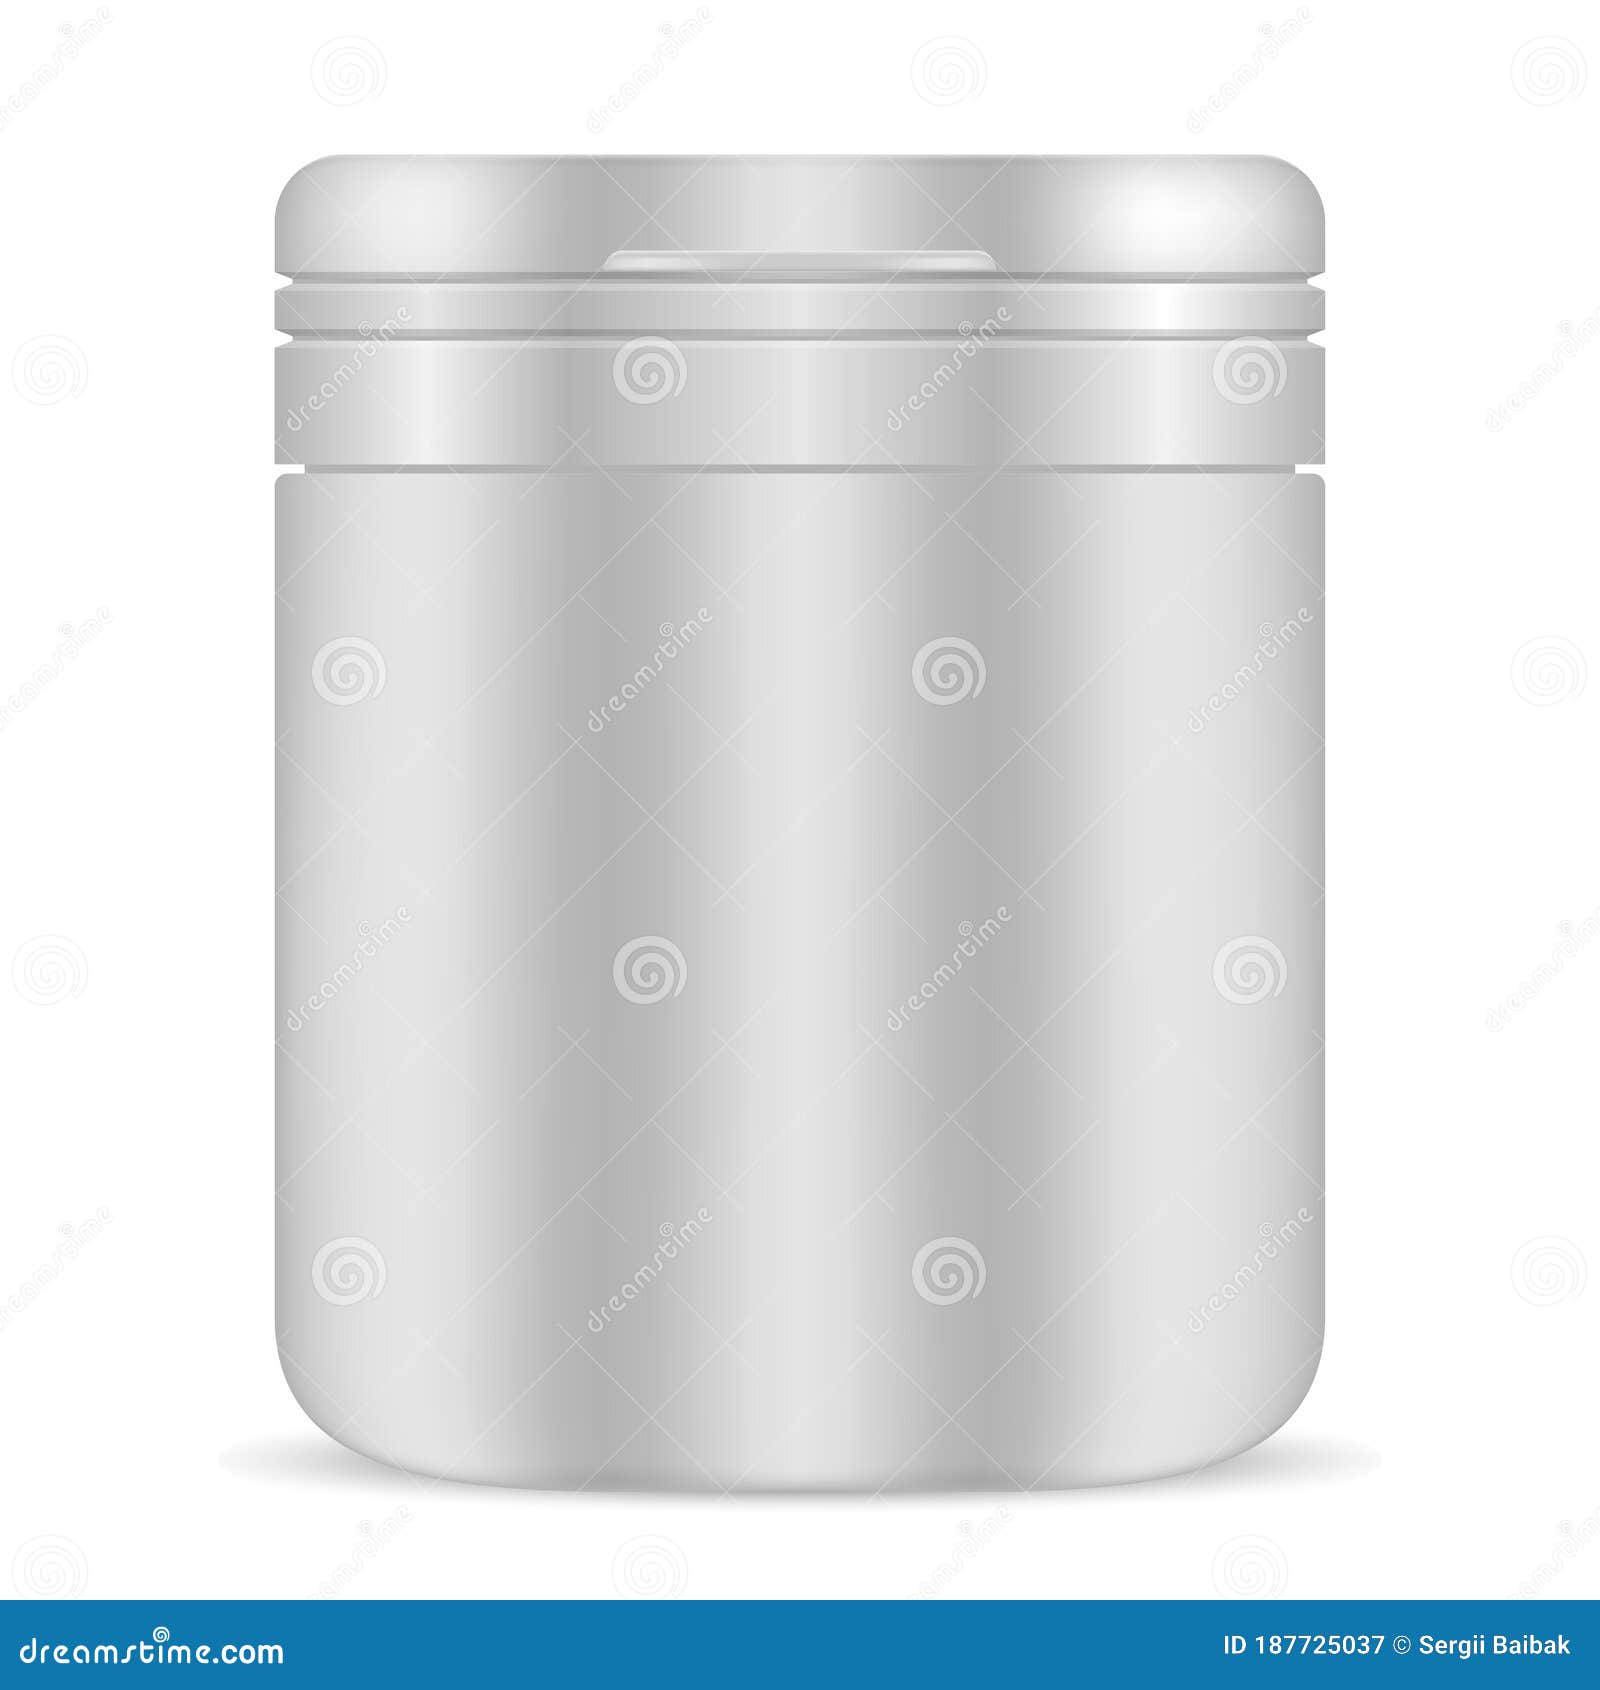 https://thumbs.dreamstime.com/z/pill-bottle-white-blank-vector-package-container-d-plastic-medicine-vitamin-isolated-supplement-jar-cap-round-187725037.jpg